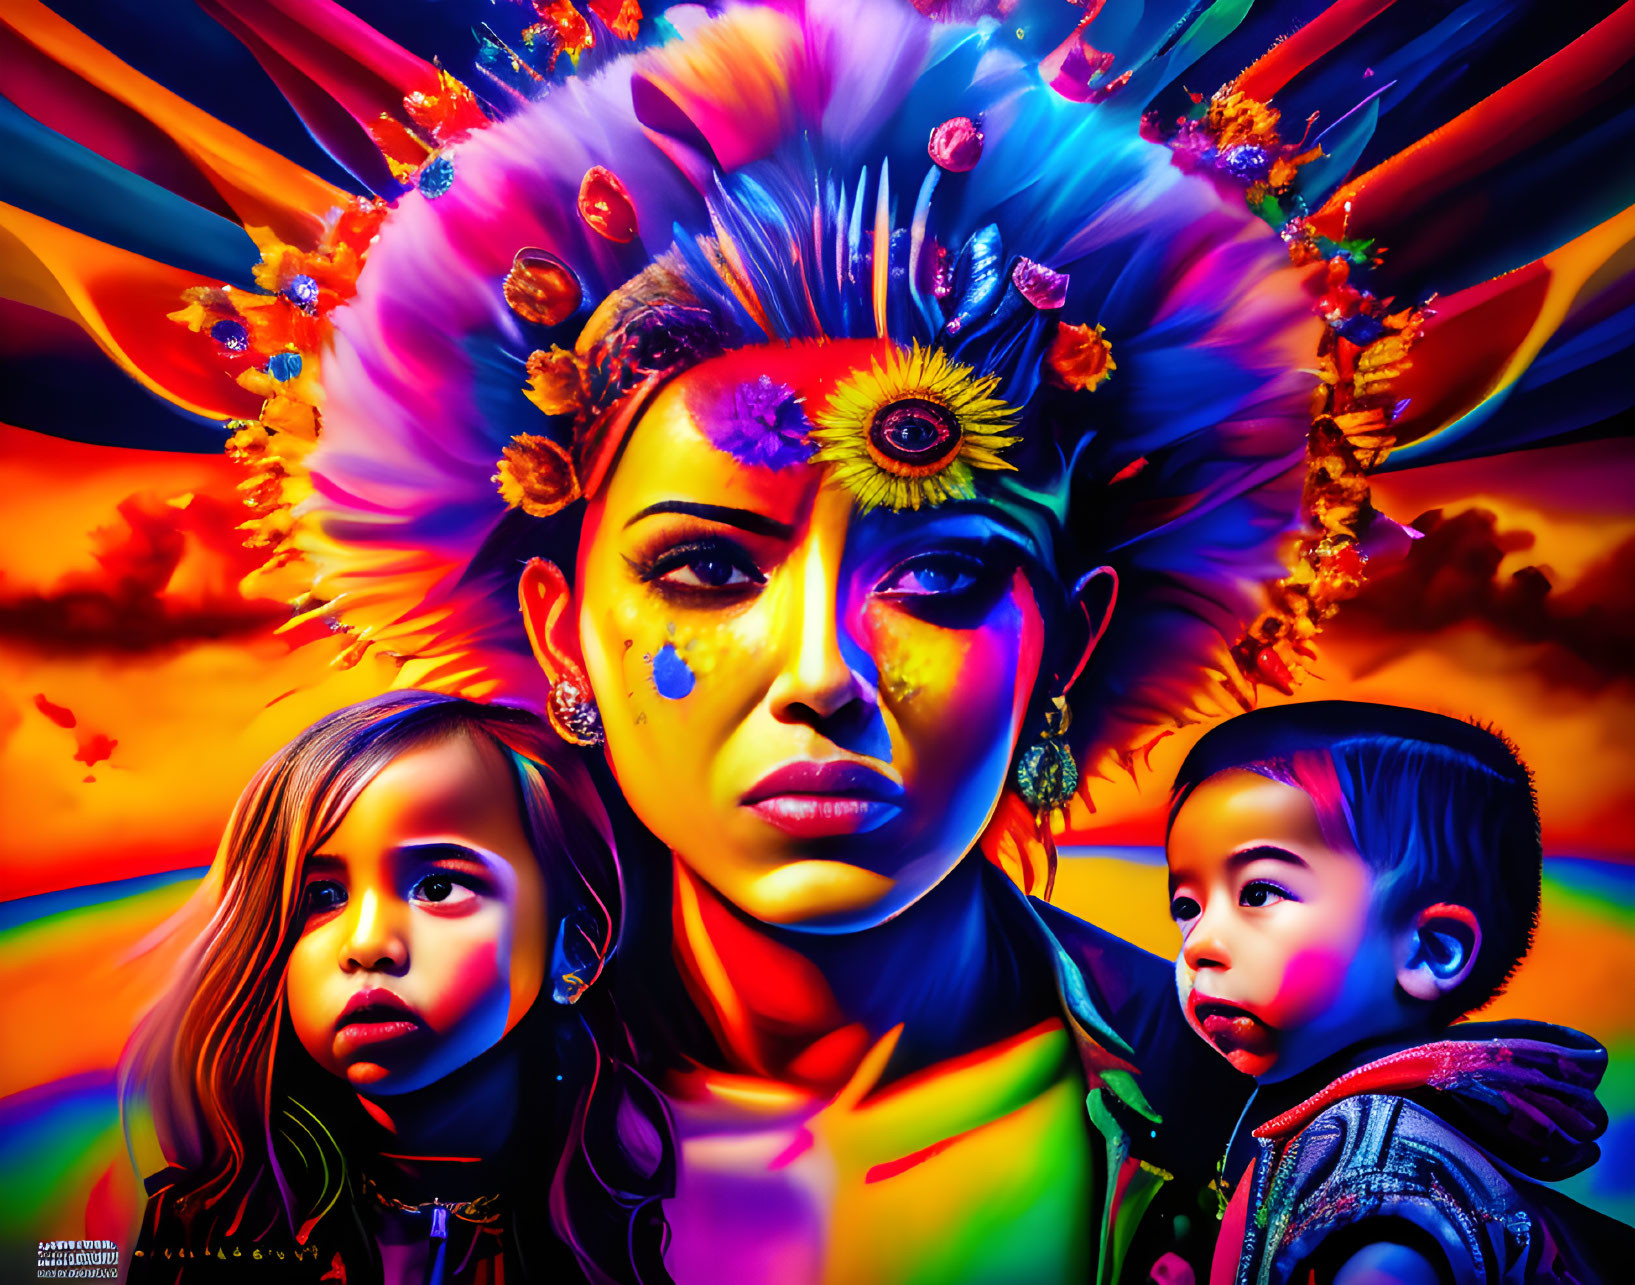 Colorful portrait of a woman with floral headdress and children against rainbow background